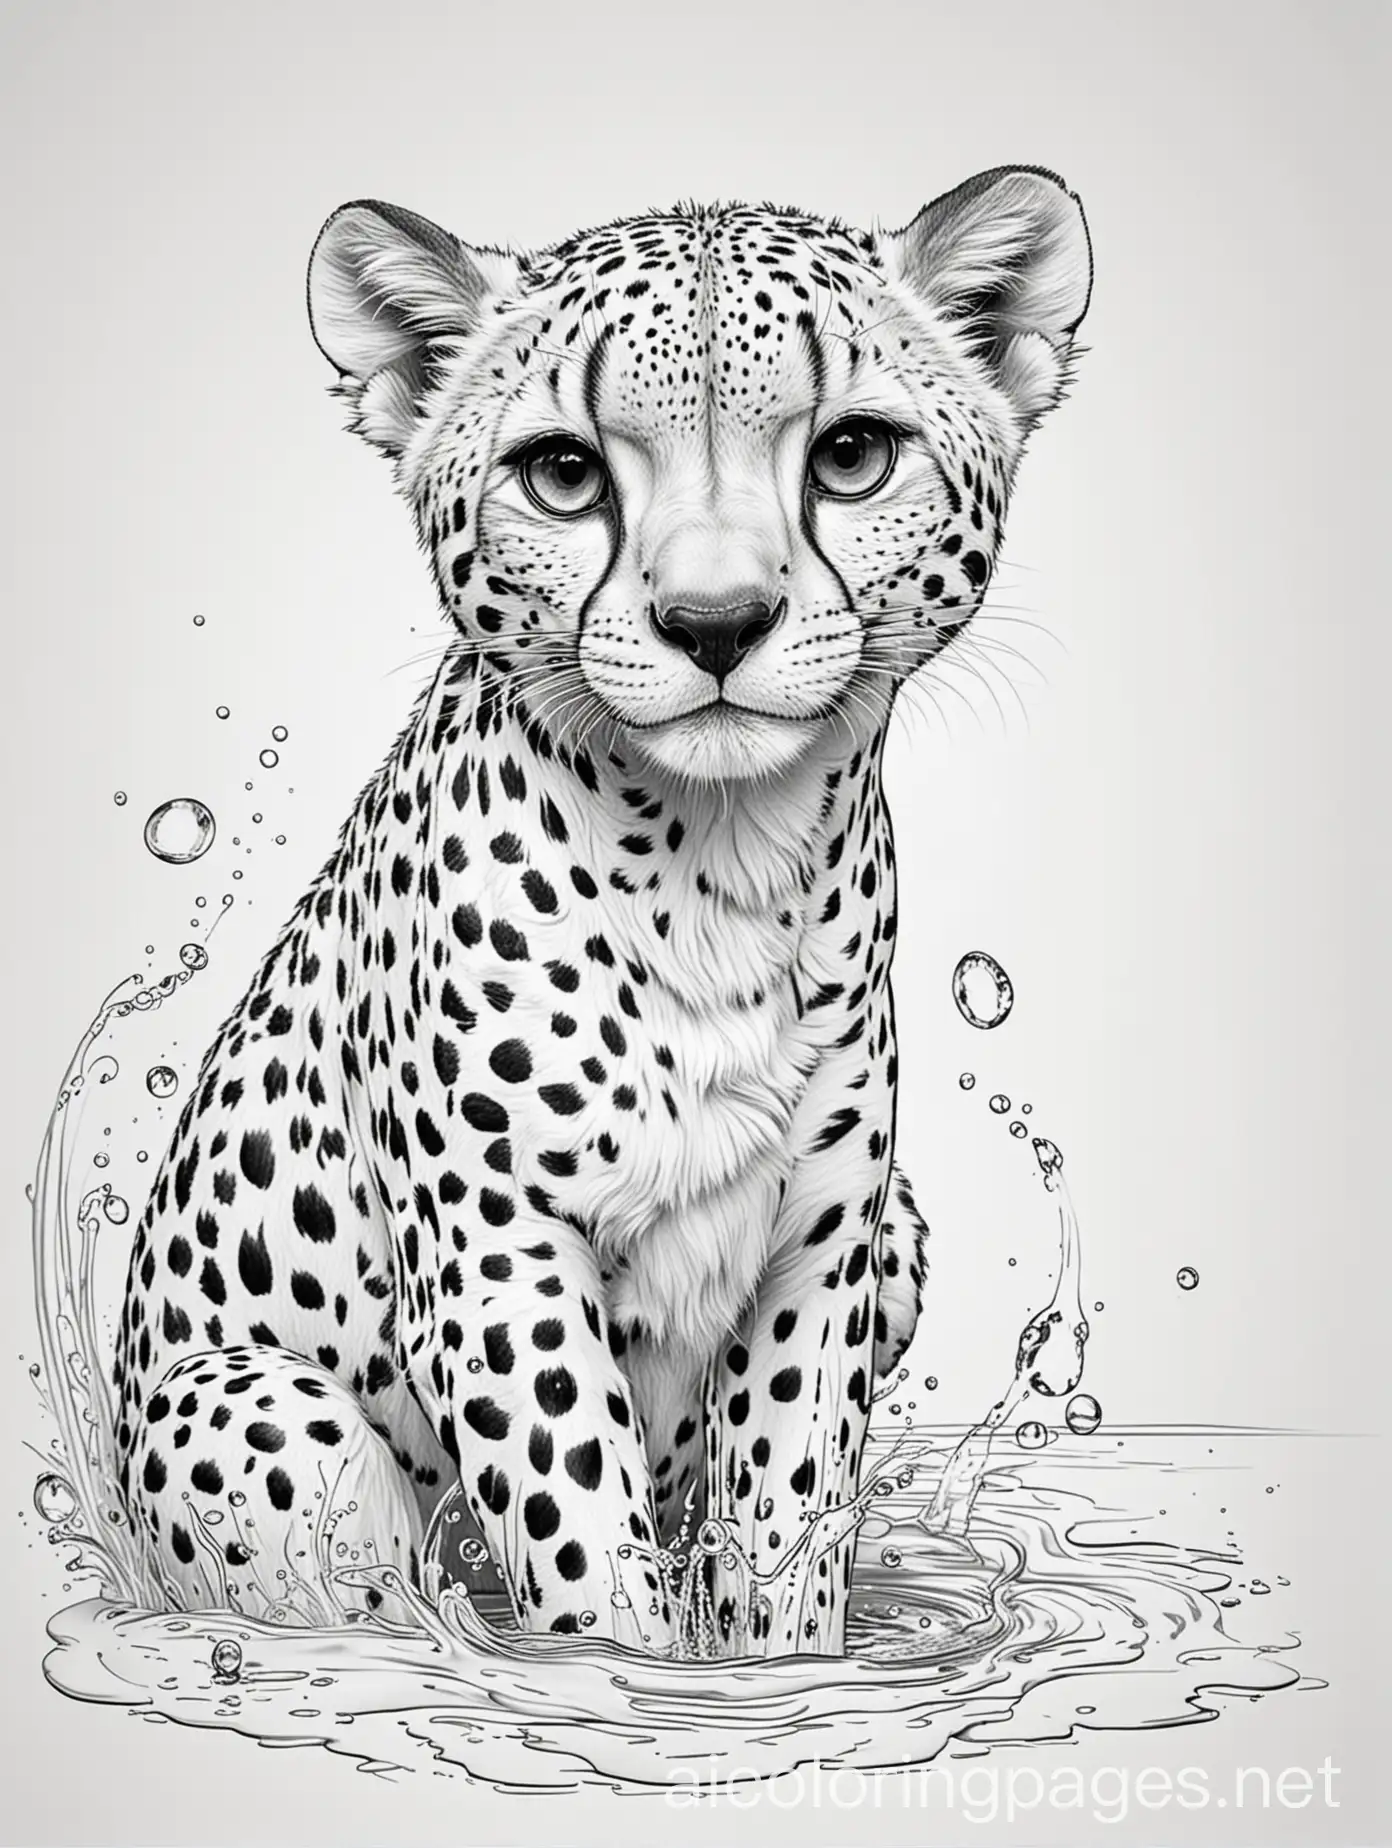 smiling cheetah drinking water, Coloring Page, black and white, line art, pure white background, Simplicity, Ample White Space. , Coloring Page, black and white, line art, white background, Simplicity, Ample White Space. The background of the coloring page is plain white to make it easy for young children to color within the lines. The outlines of all the subjects are easy to distinguish, making it simple for kids to color without too much difficulty